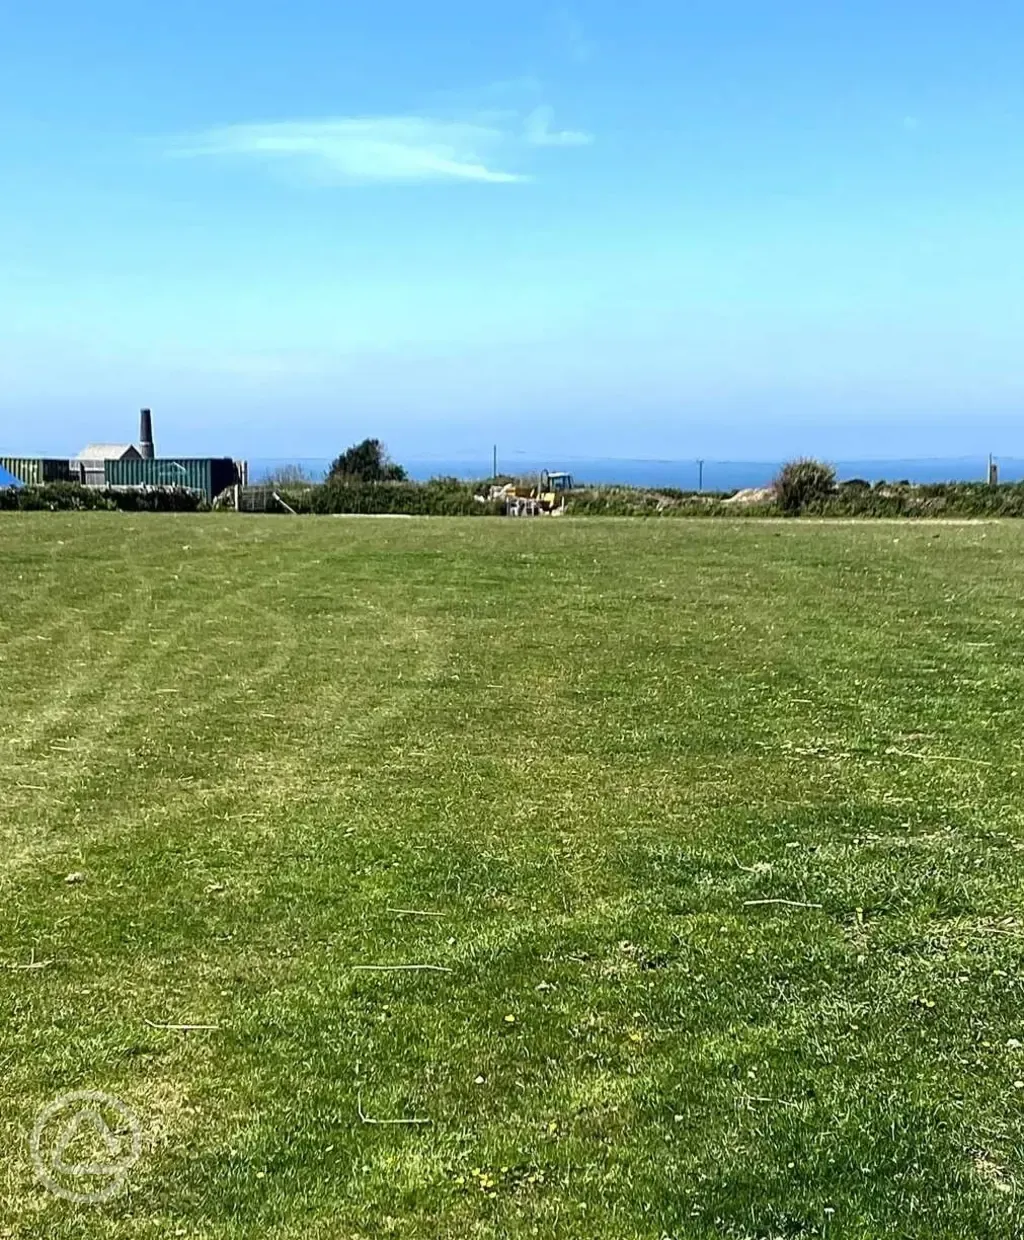 Non electric grass pitches and sea views